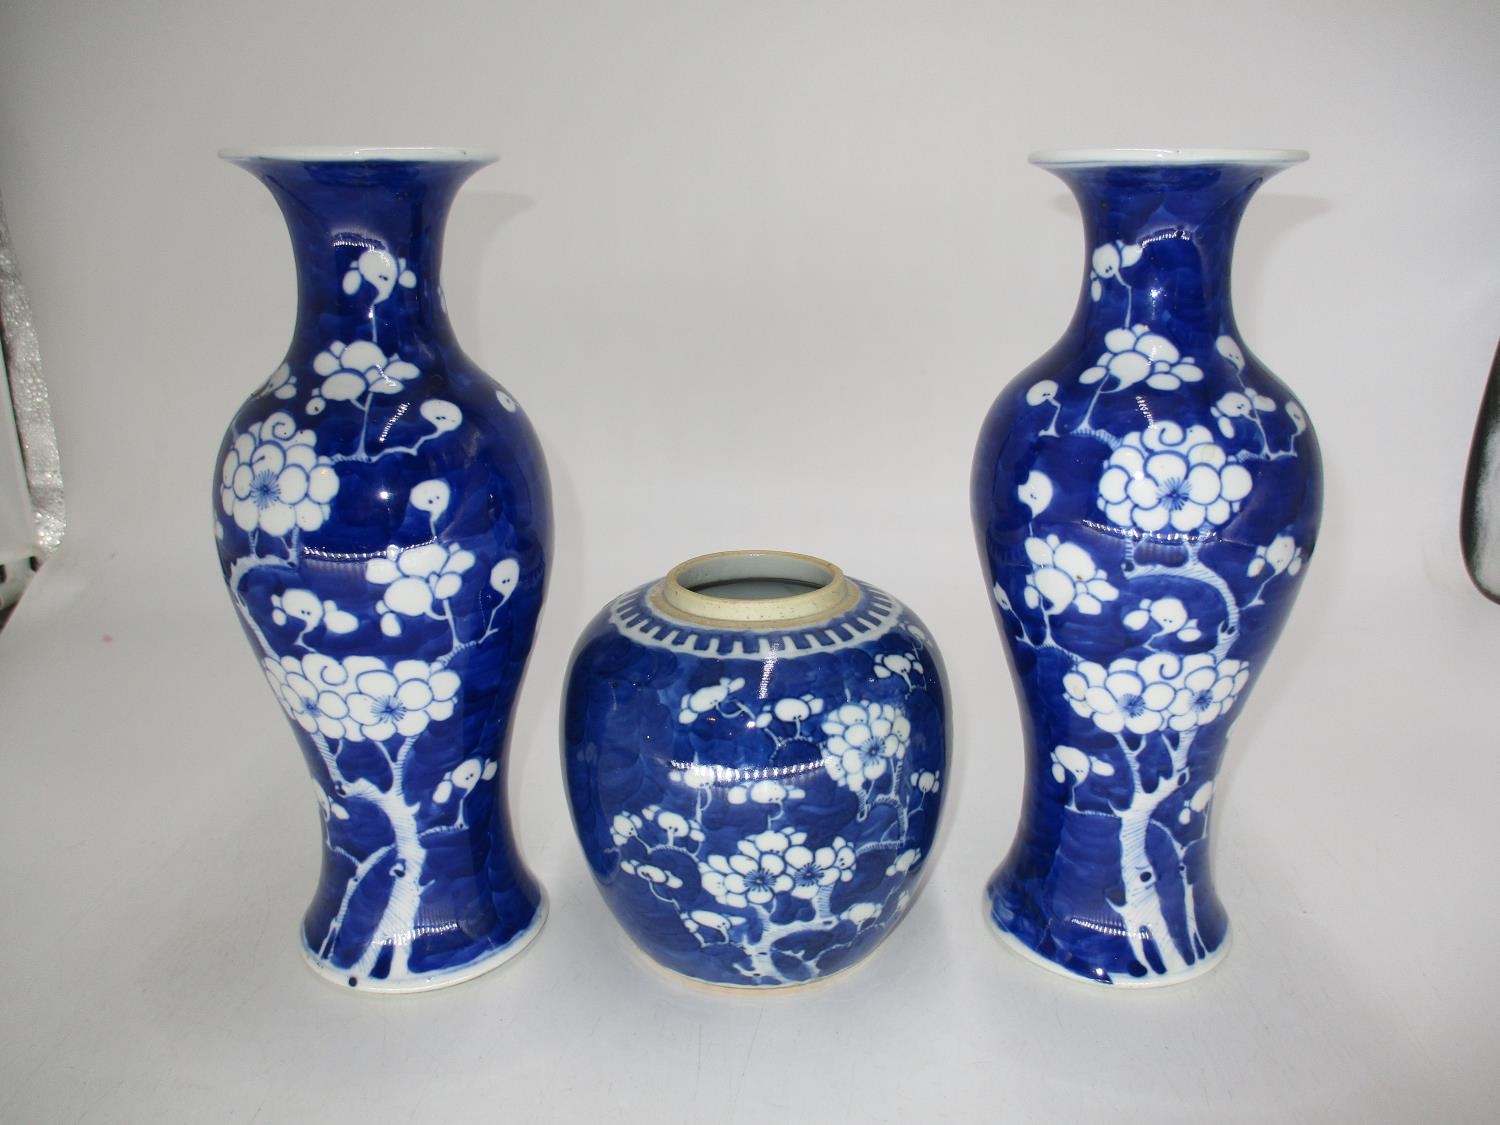 Pair of Chinese Porcelain Blue and White Prunus Vases and Ginger Jar, 25 and 13cm